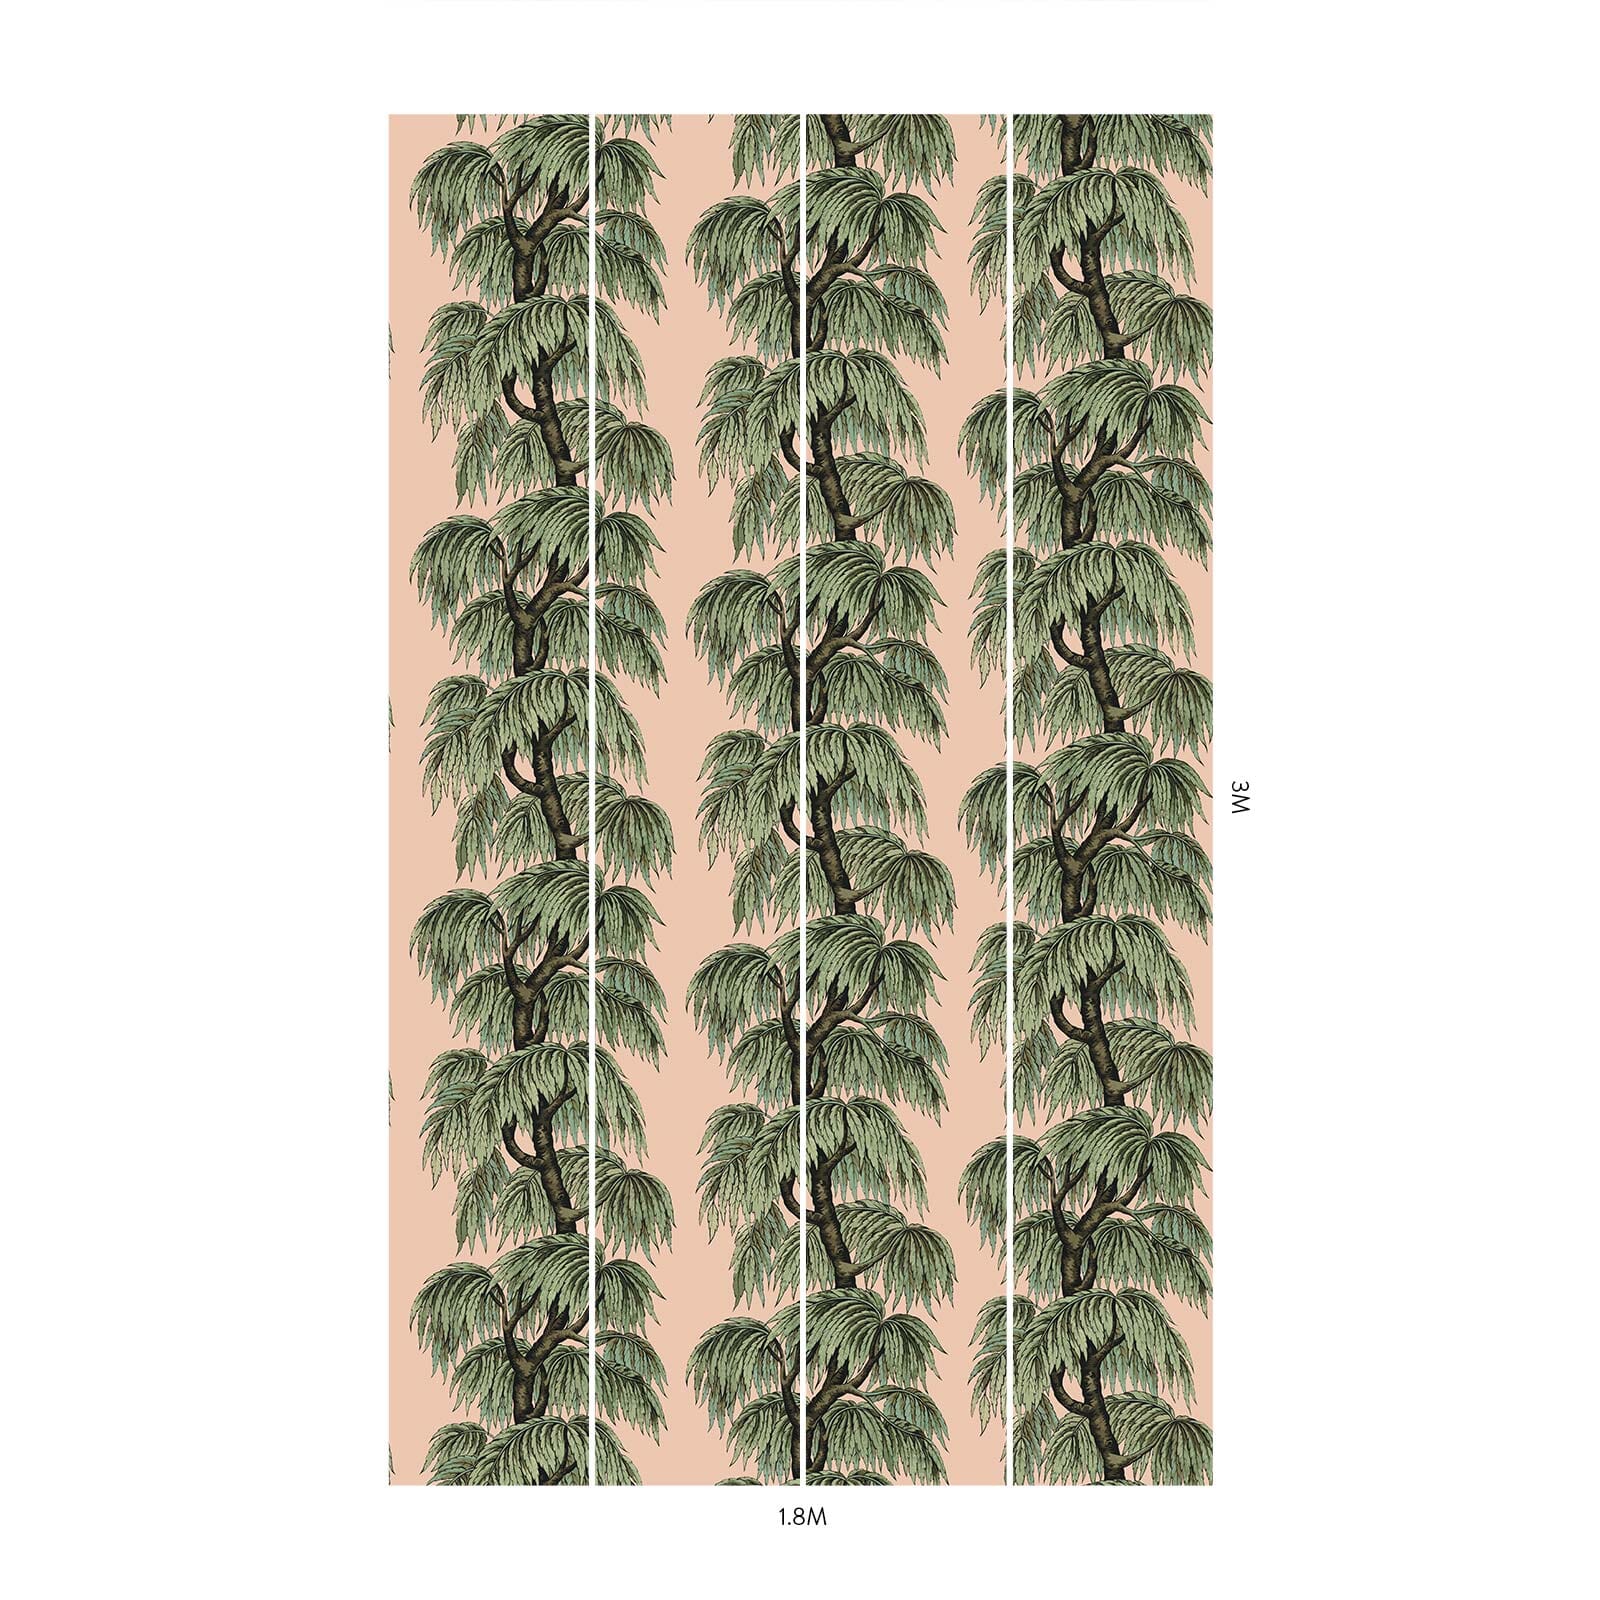 Introduce the ambience of 1950s Palm Springs into your home with the luxurious BABYLON wallpaper featuring the weeping willow tree's majestic boughs. Blush pink and soft greens create a sophisticated Art Deco-inspired colour palette that's sure to